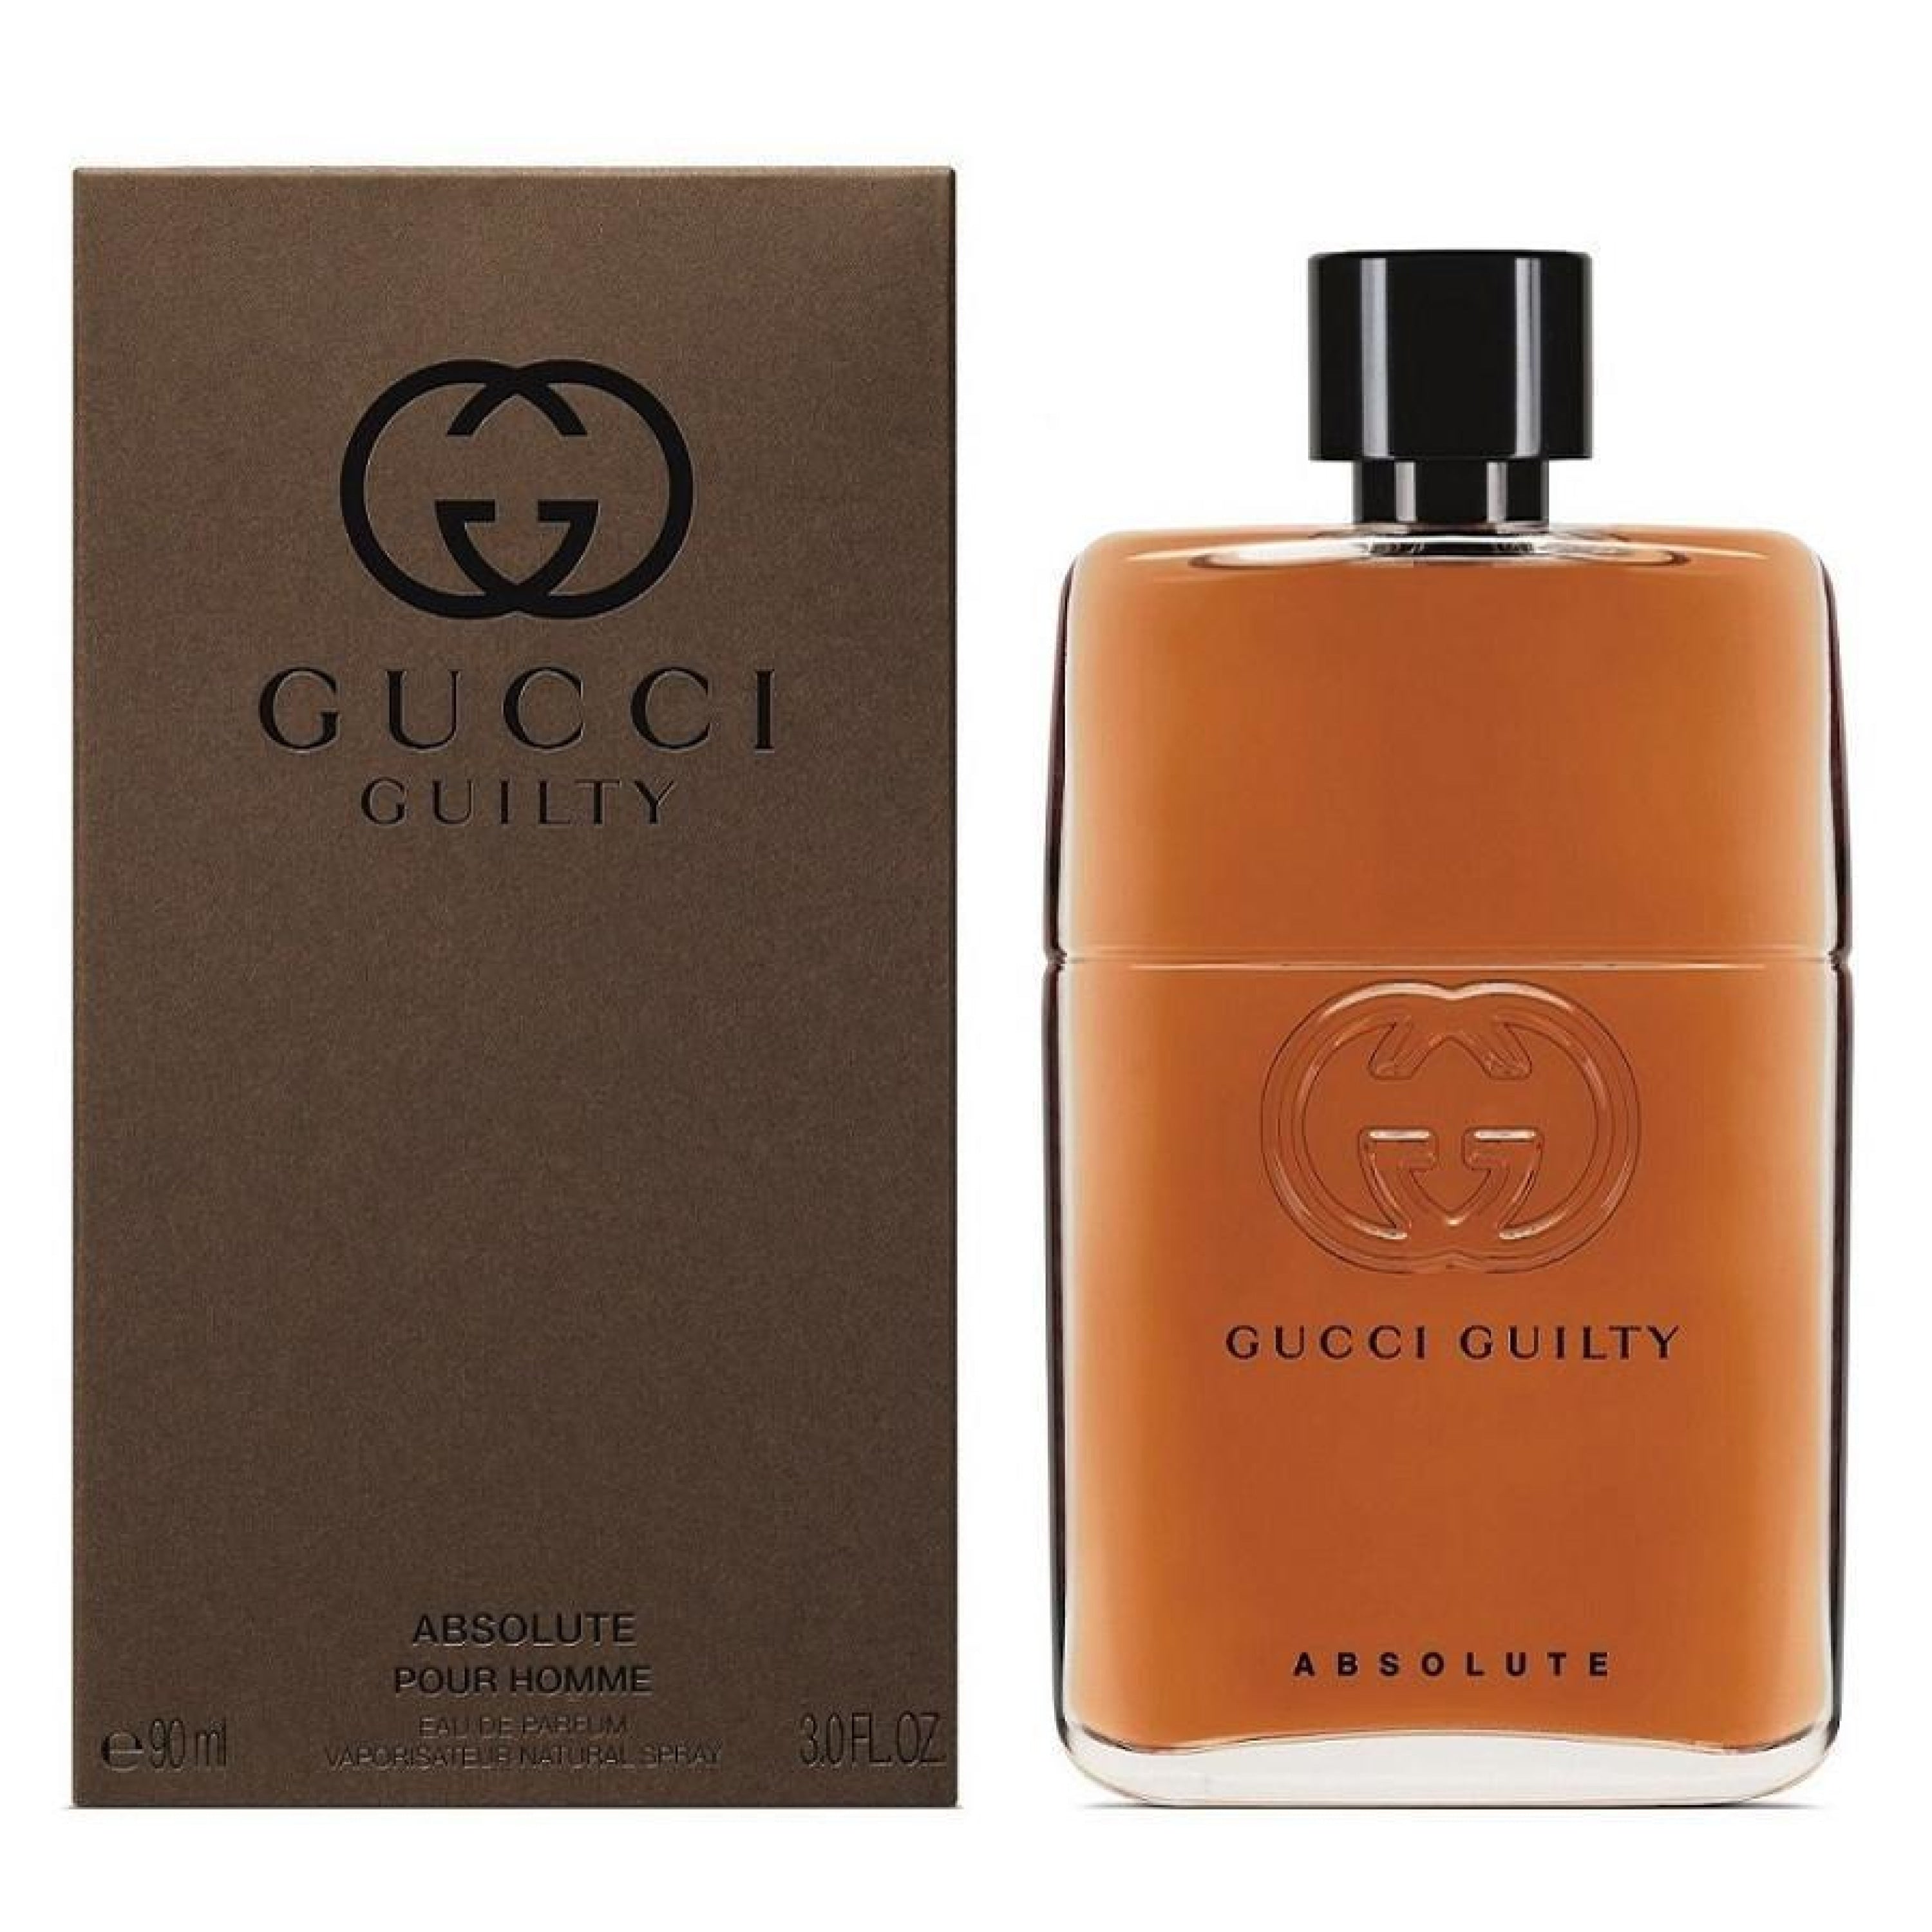 Gucci Guilty Absolute Pour Homme 90Ml Edp Spray (M)